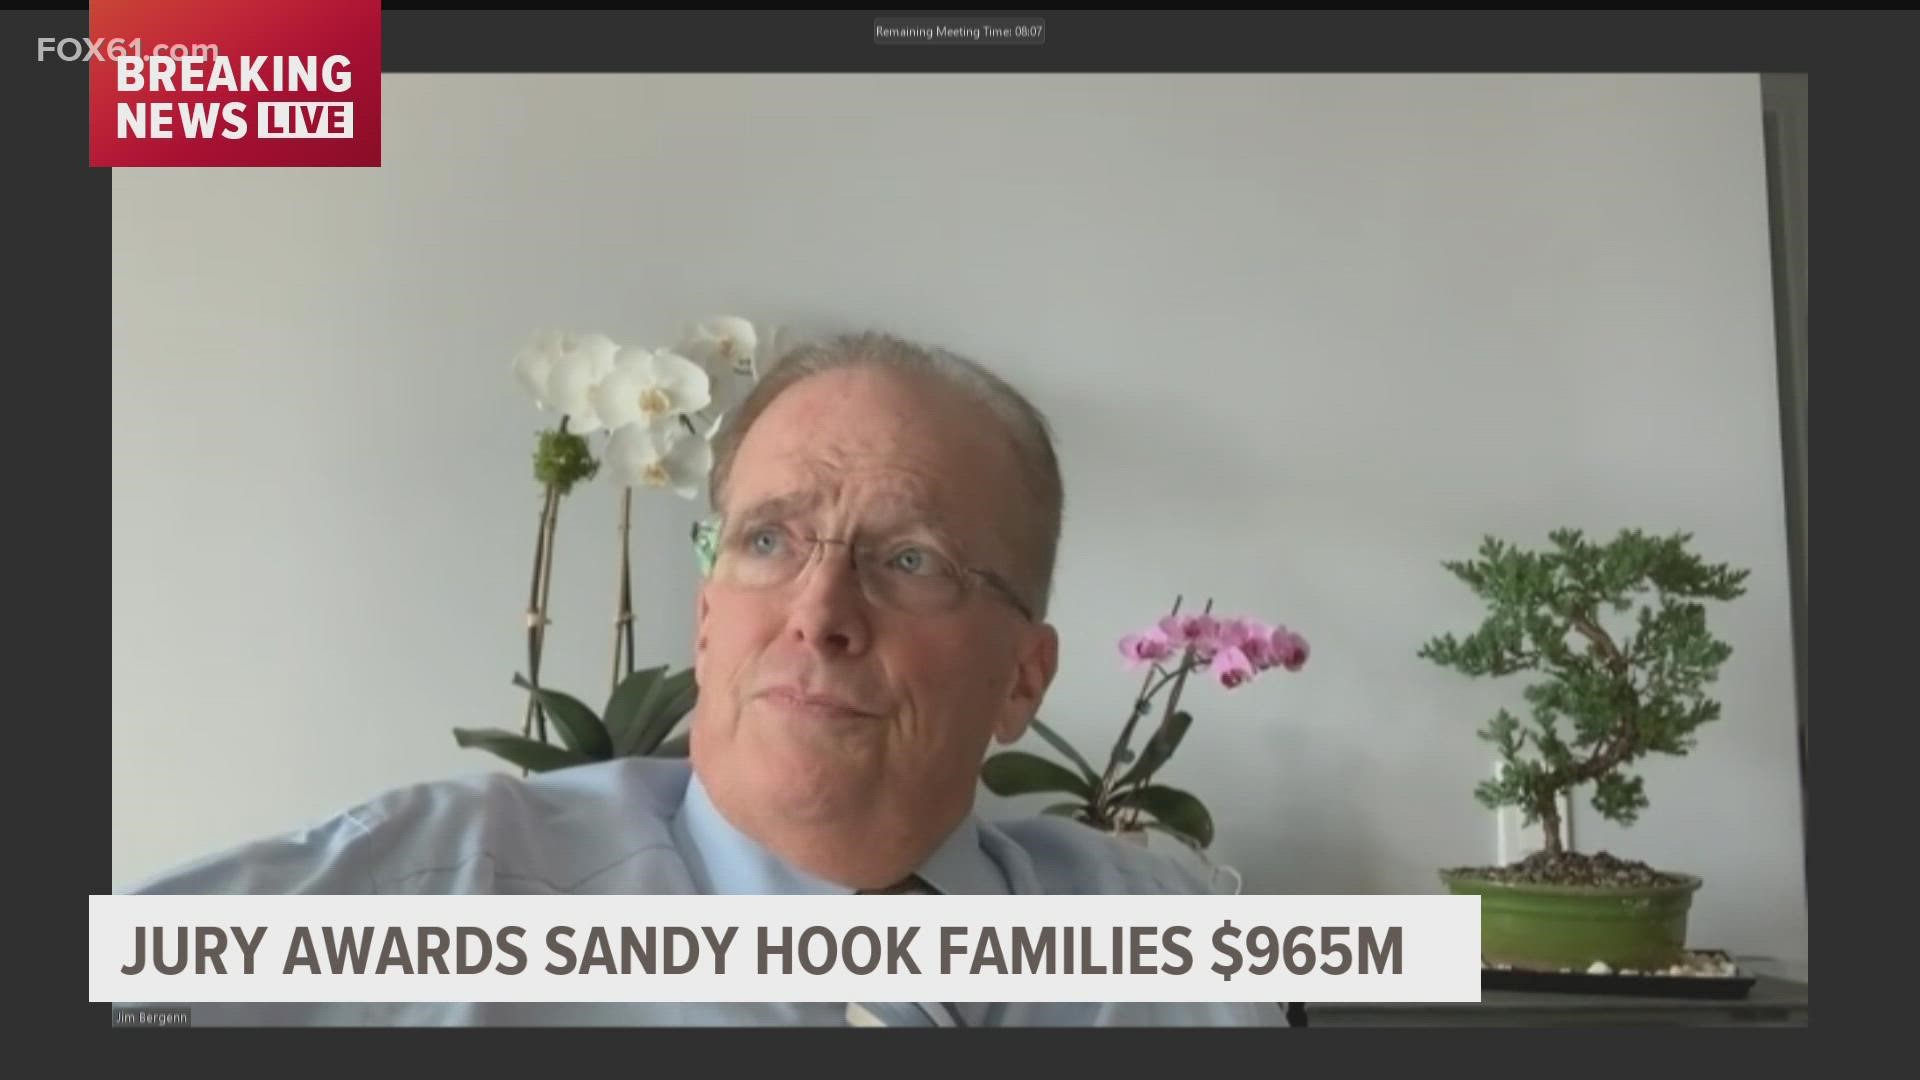 Attorney Jim Bergenn provided his analysis on Alex Jones being ordered to pay $965 million to Sandy Hook families.